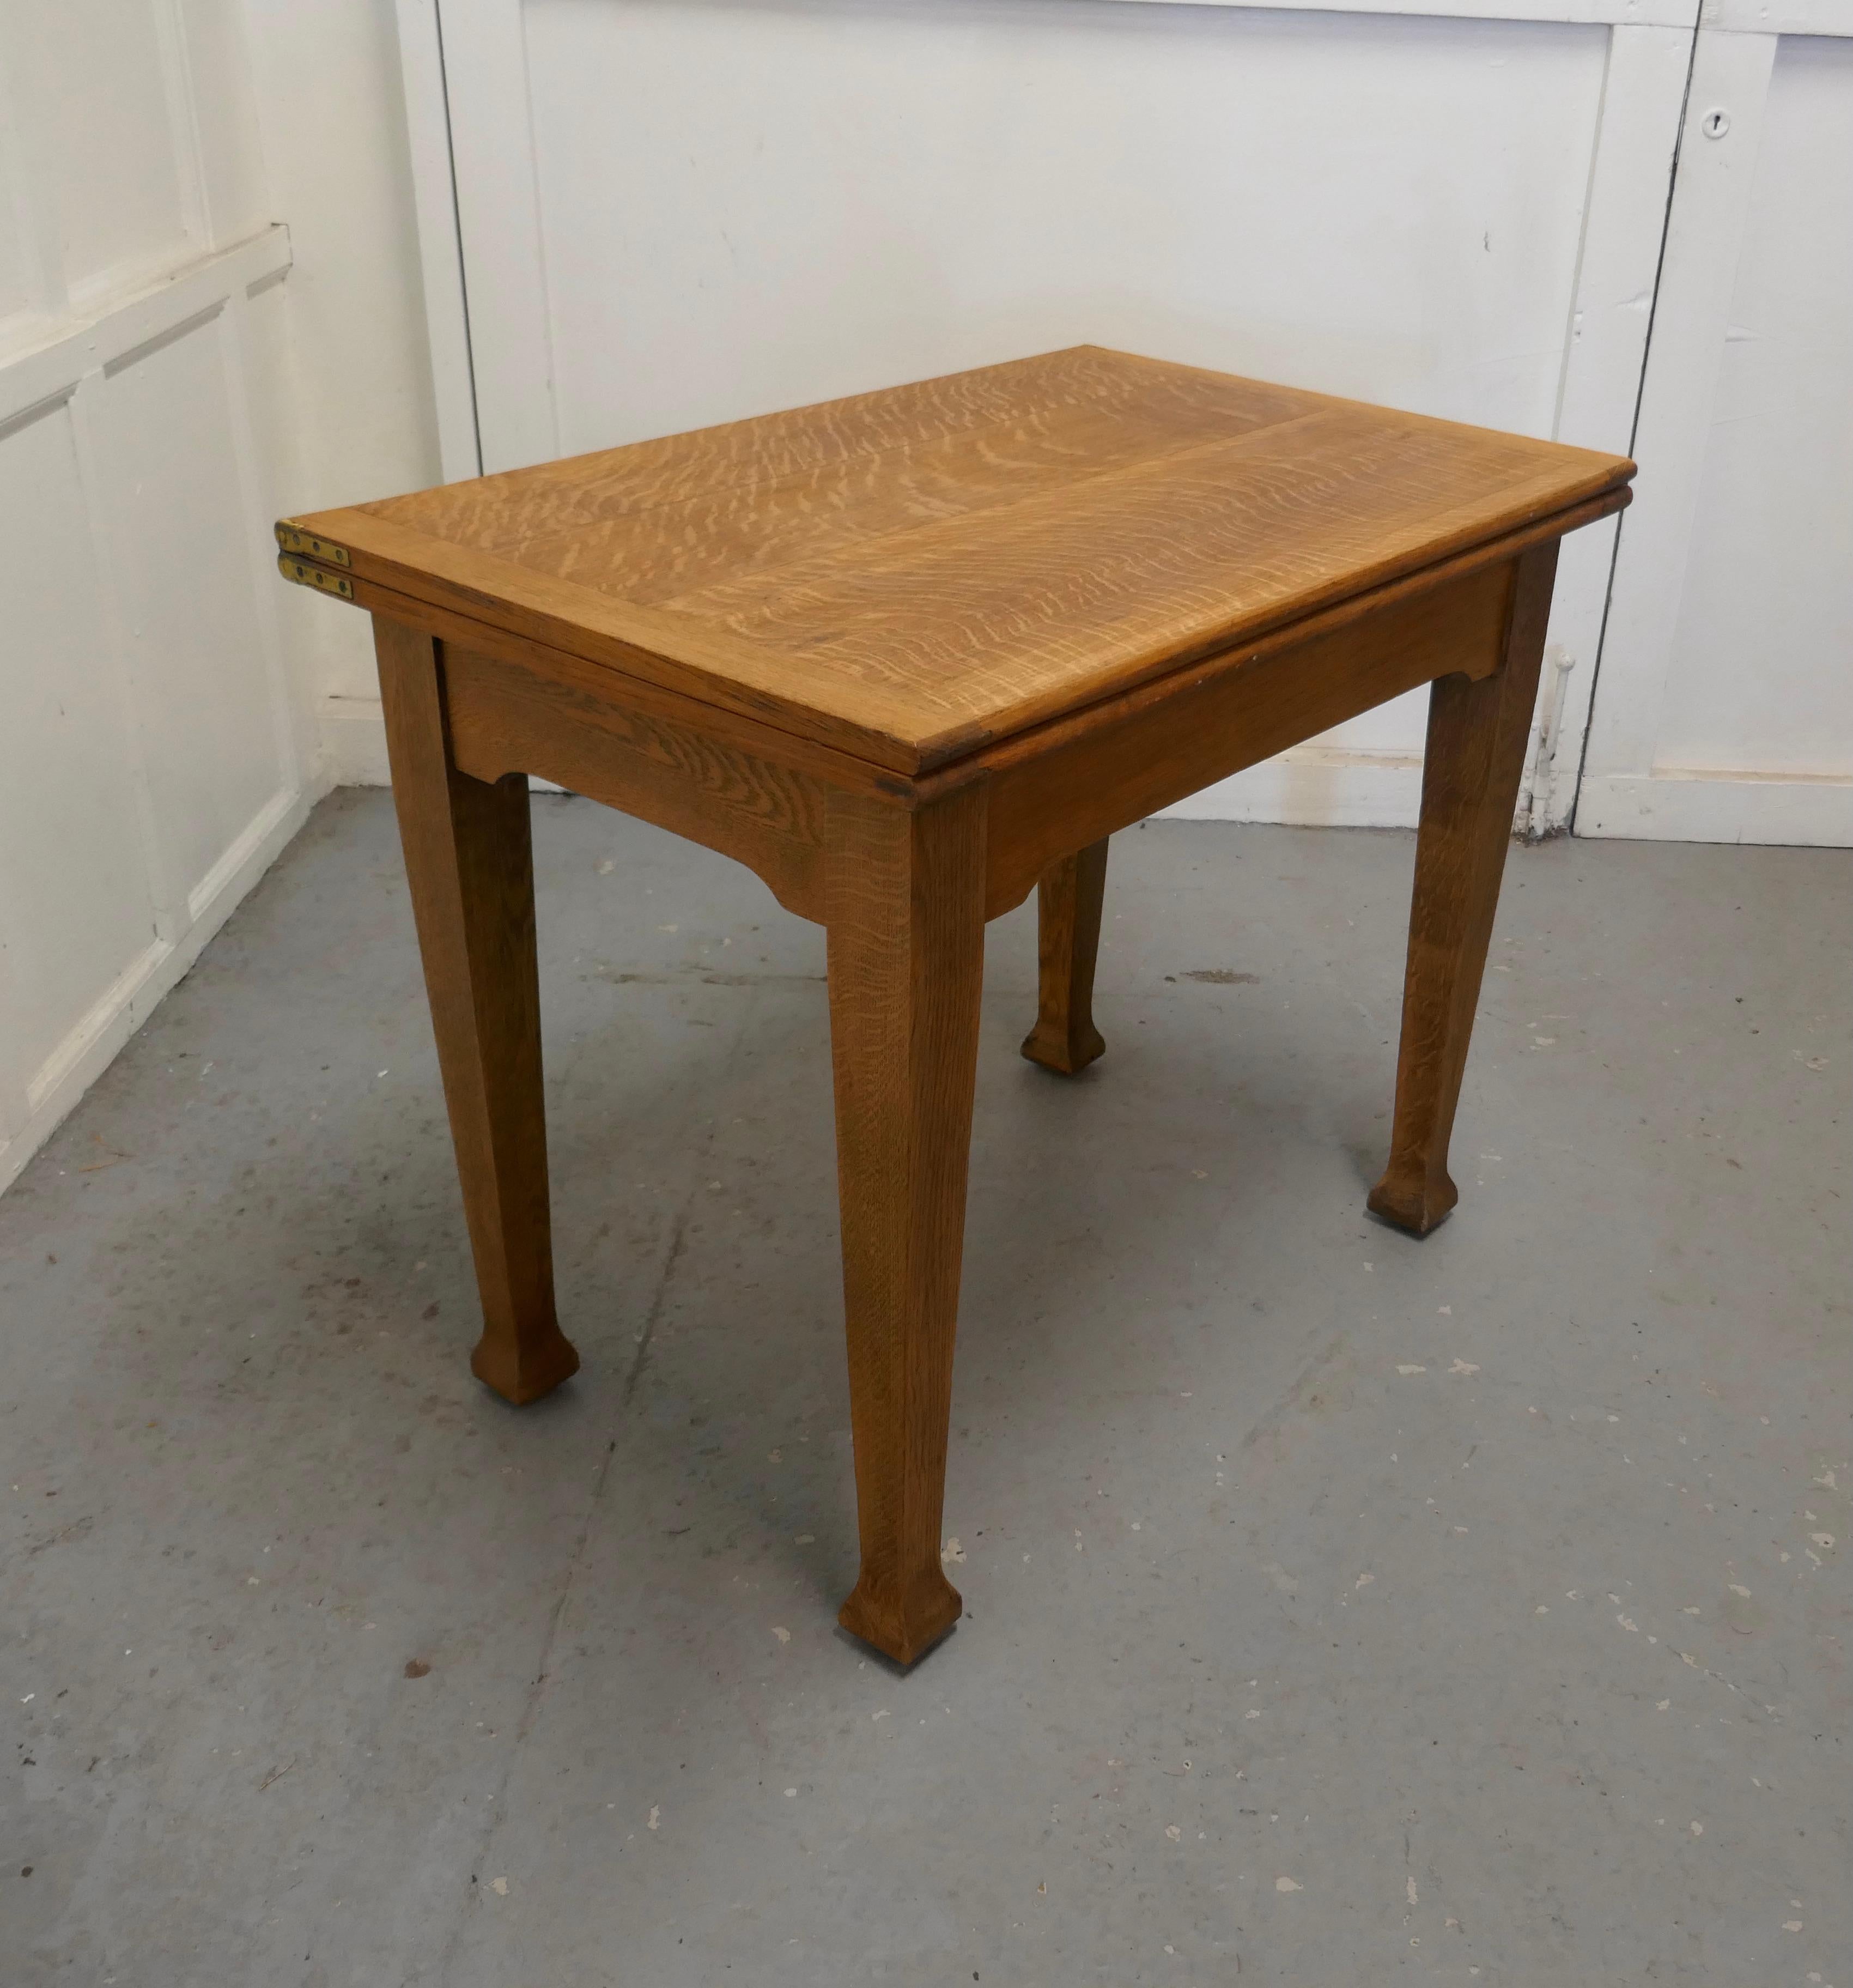 Golden oak Arts & Crafts Bachelor’s Metamorphic dining table

This is an unusual piece, the table is a neat rectangular occasional table with the added advantage that the top can be folded over to make decent size dining table which will seat 4